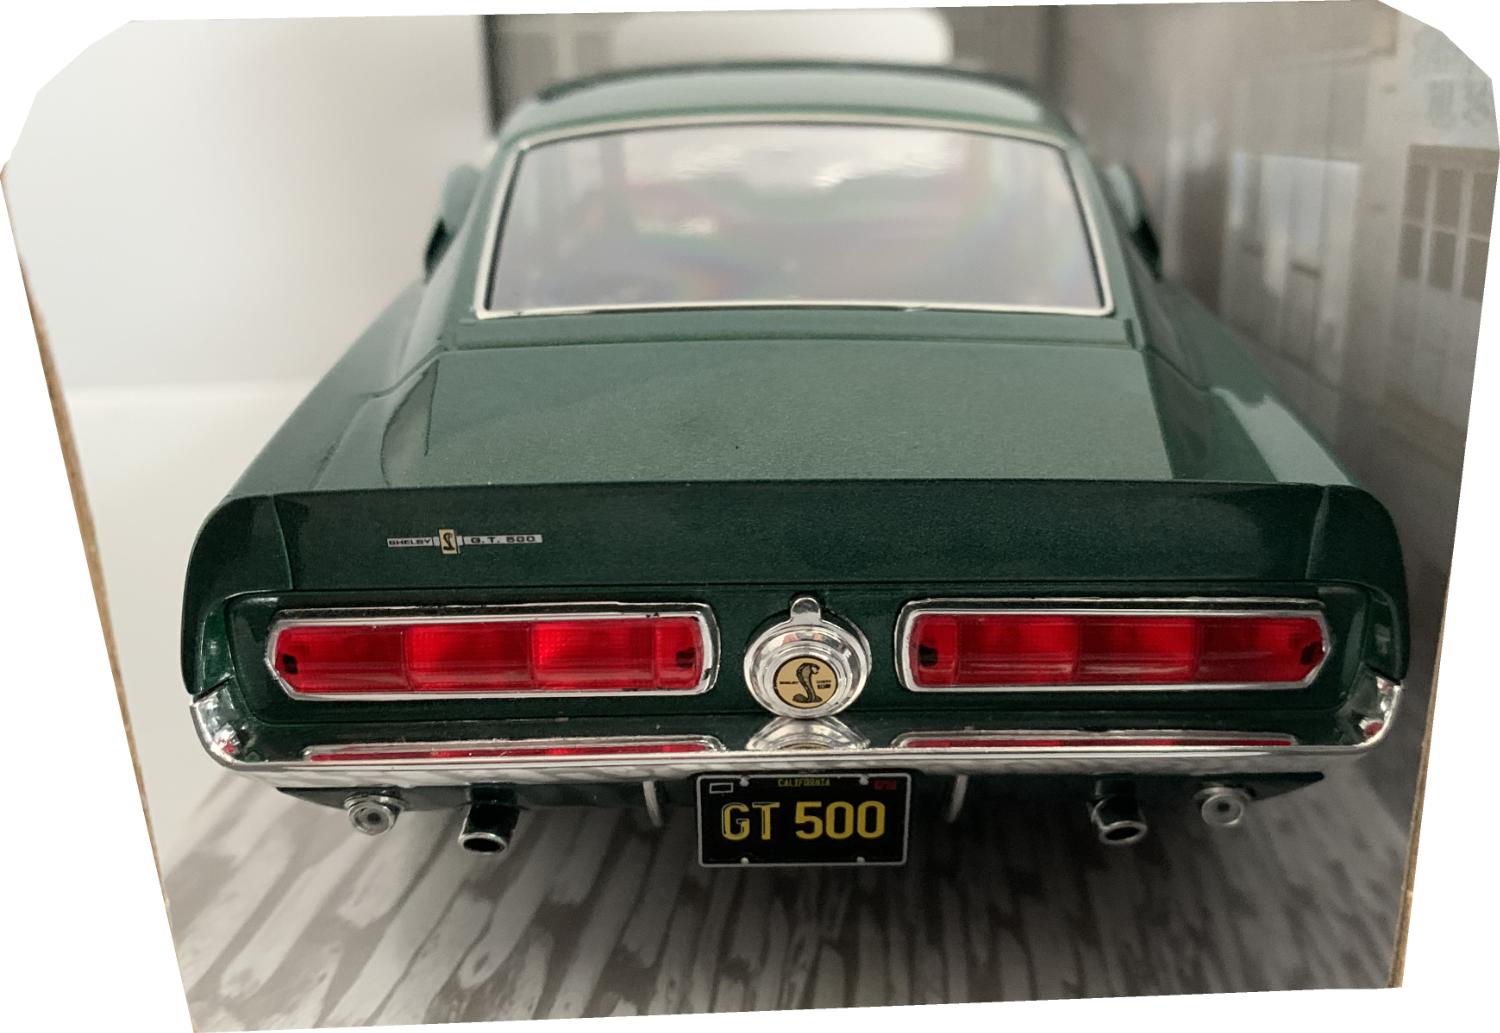 A very good representation of the Ford Shelby Mustang GT500 from 1967 decorated in dark highland green